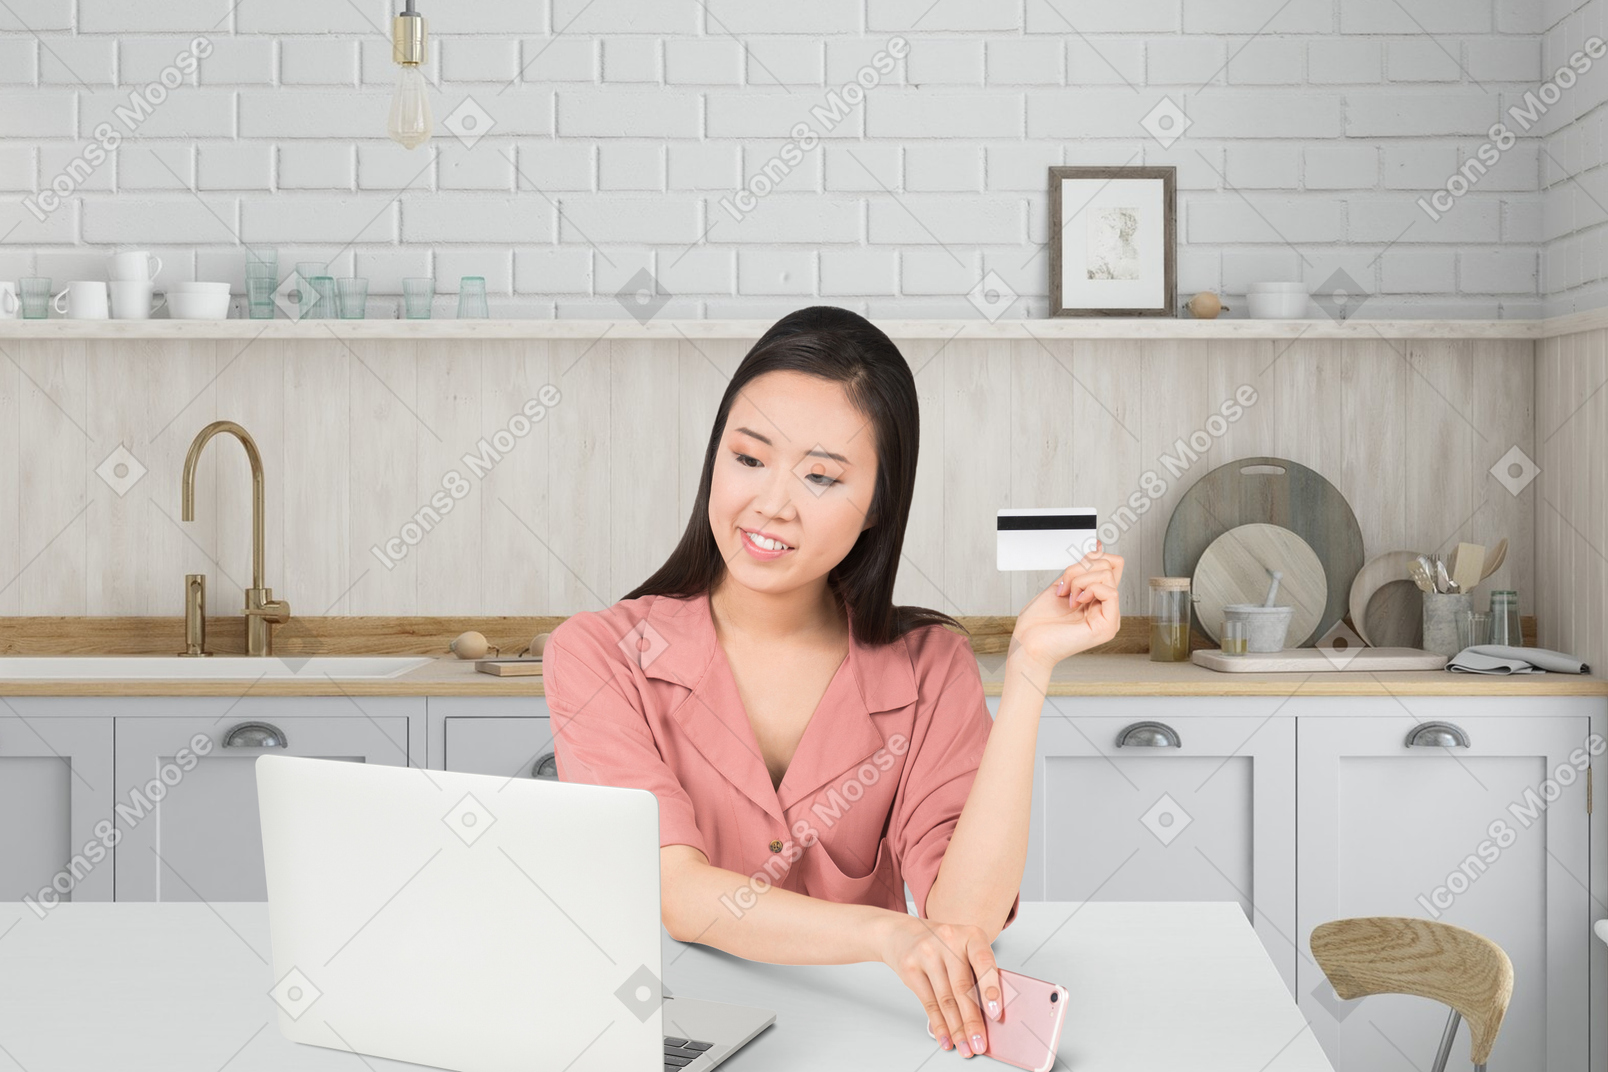 A woman sitting at a table with a laptop and a credit card